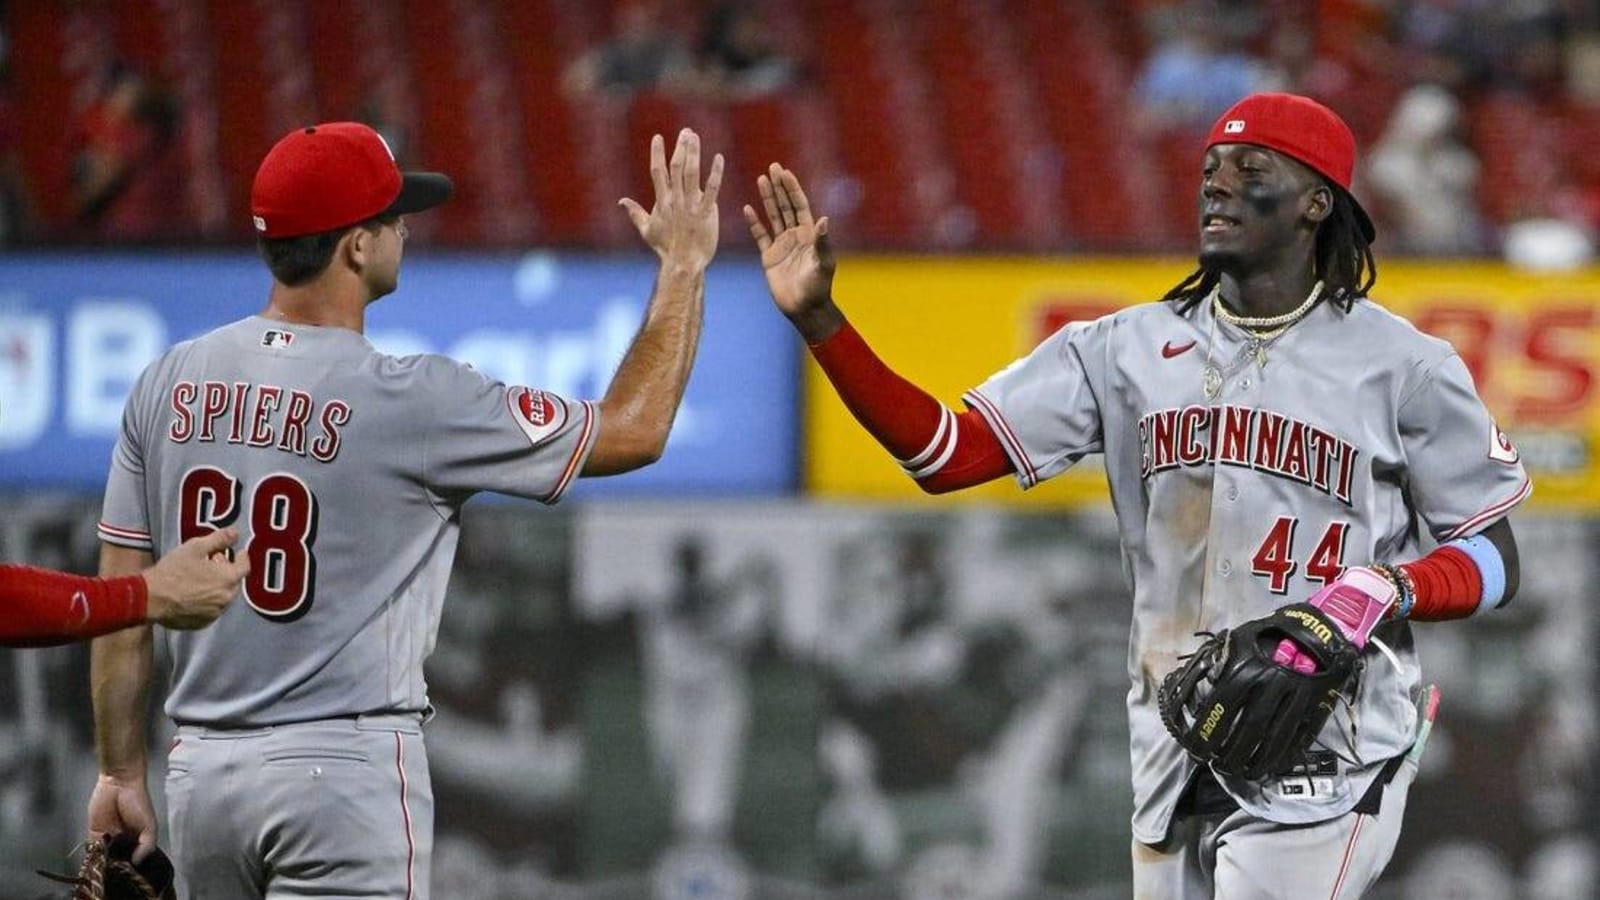 Fresh off rout, Reds aim to stay afloat in clash vs. Cards